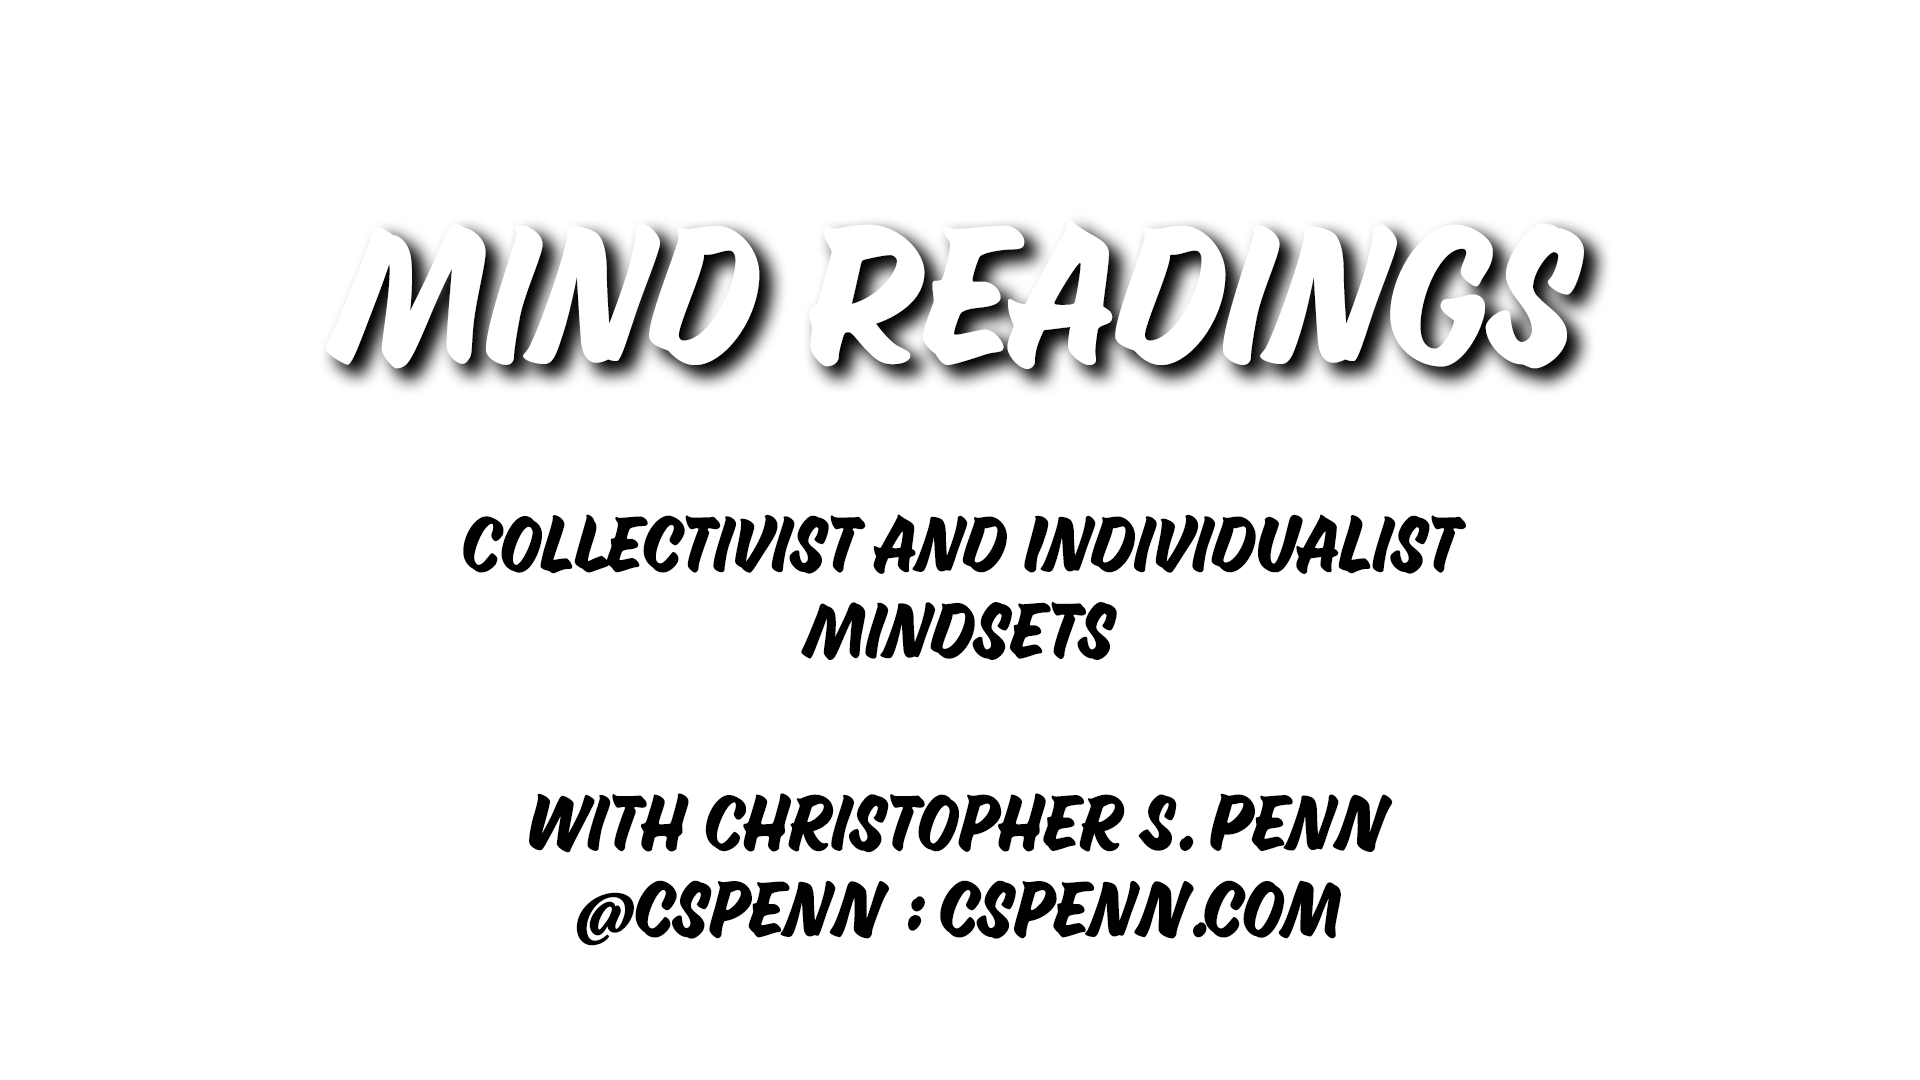 Mind Readings: Collectivist and Individualist Mindsets